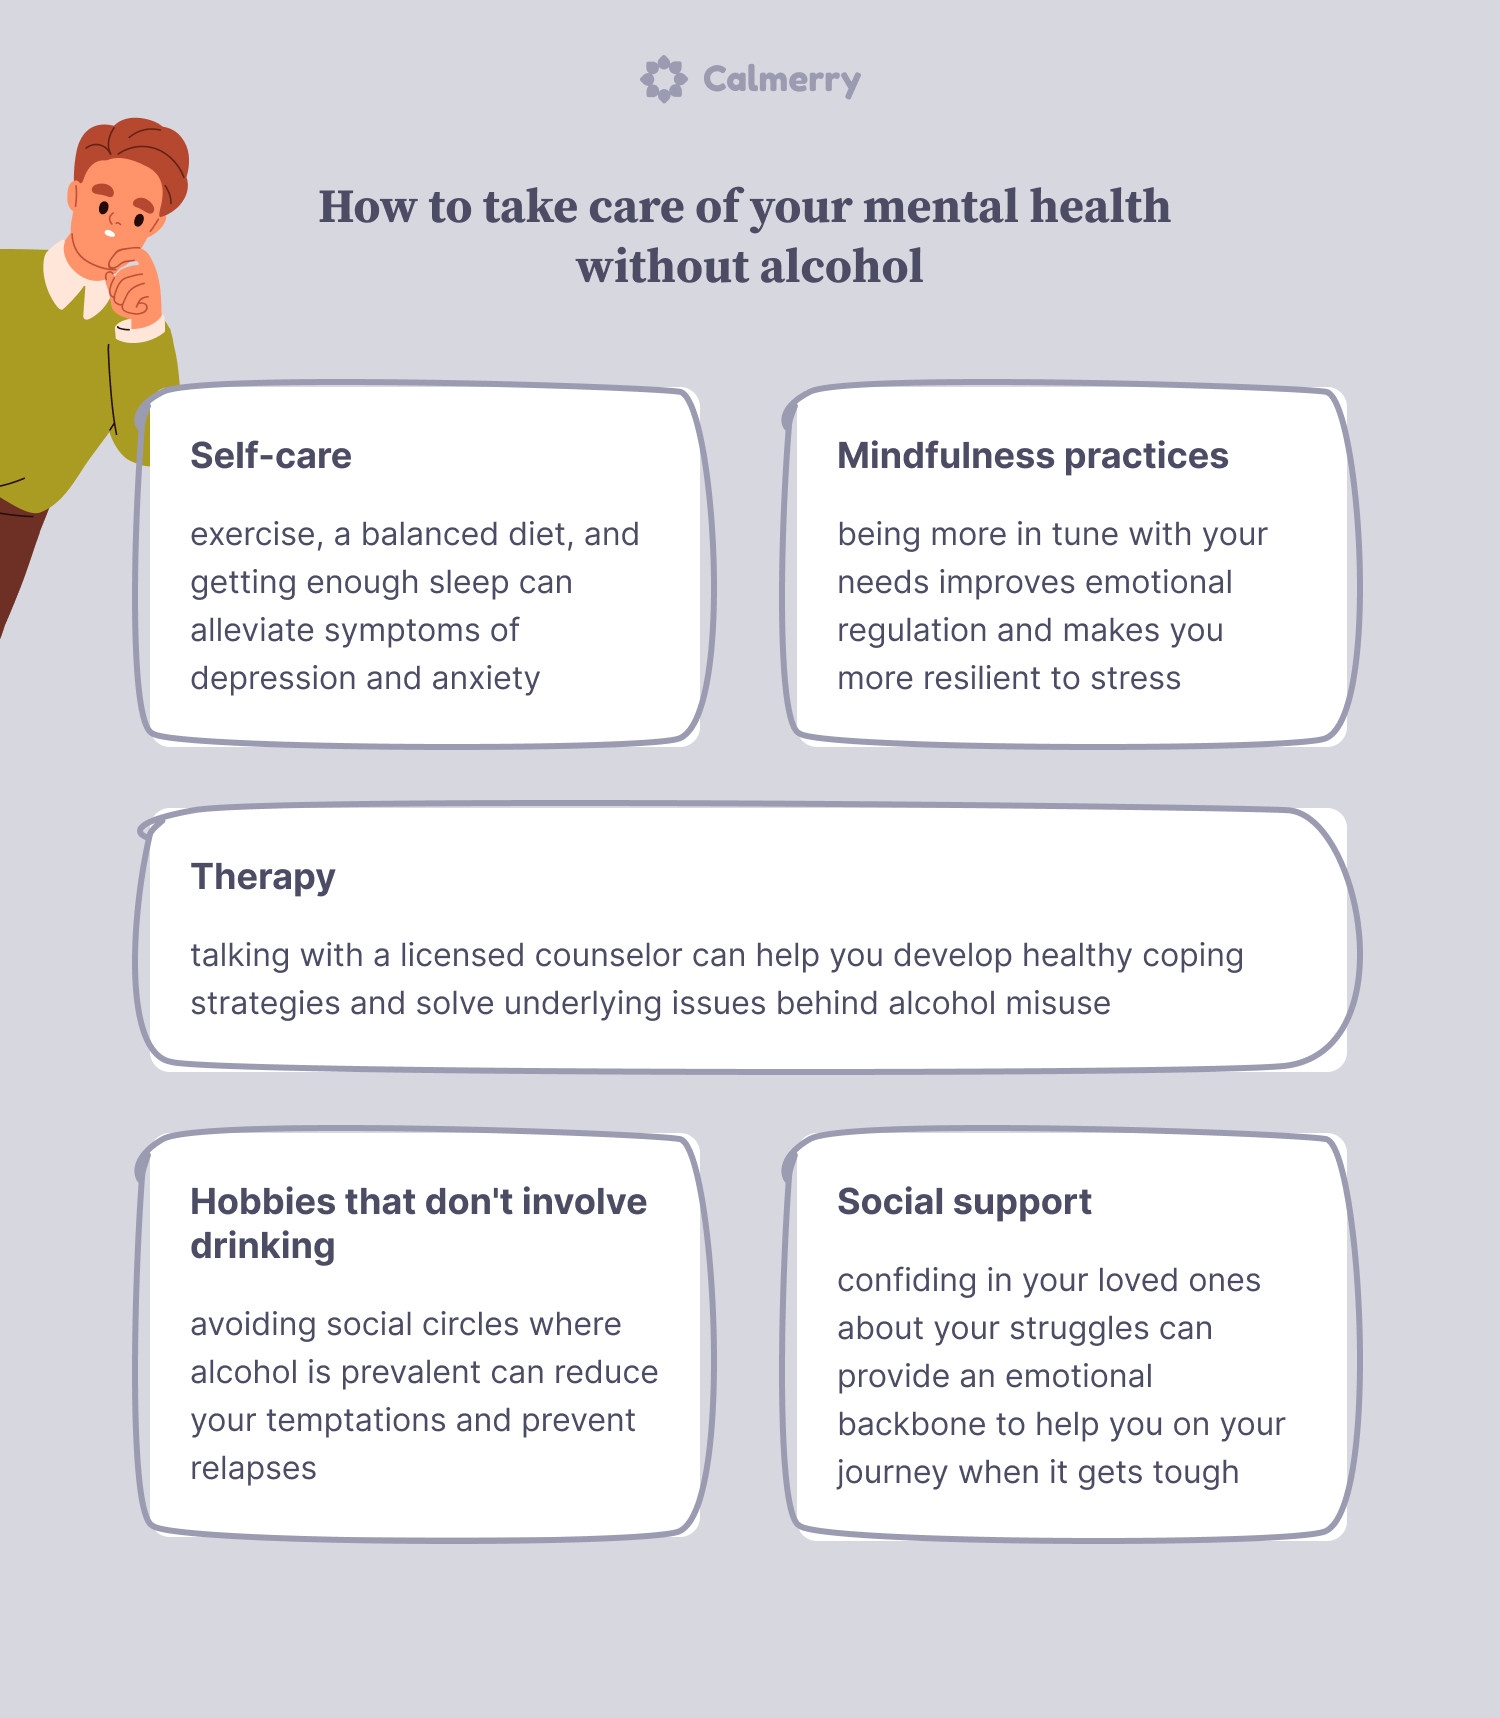 Developing healthy coping strategies to help with your mental health is one of the best ways to become less reliant on alcohol for coping